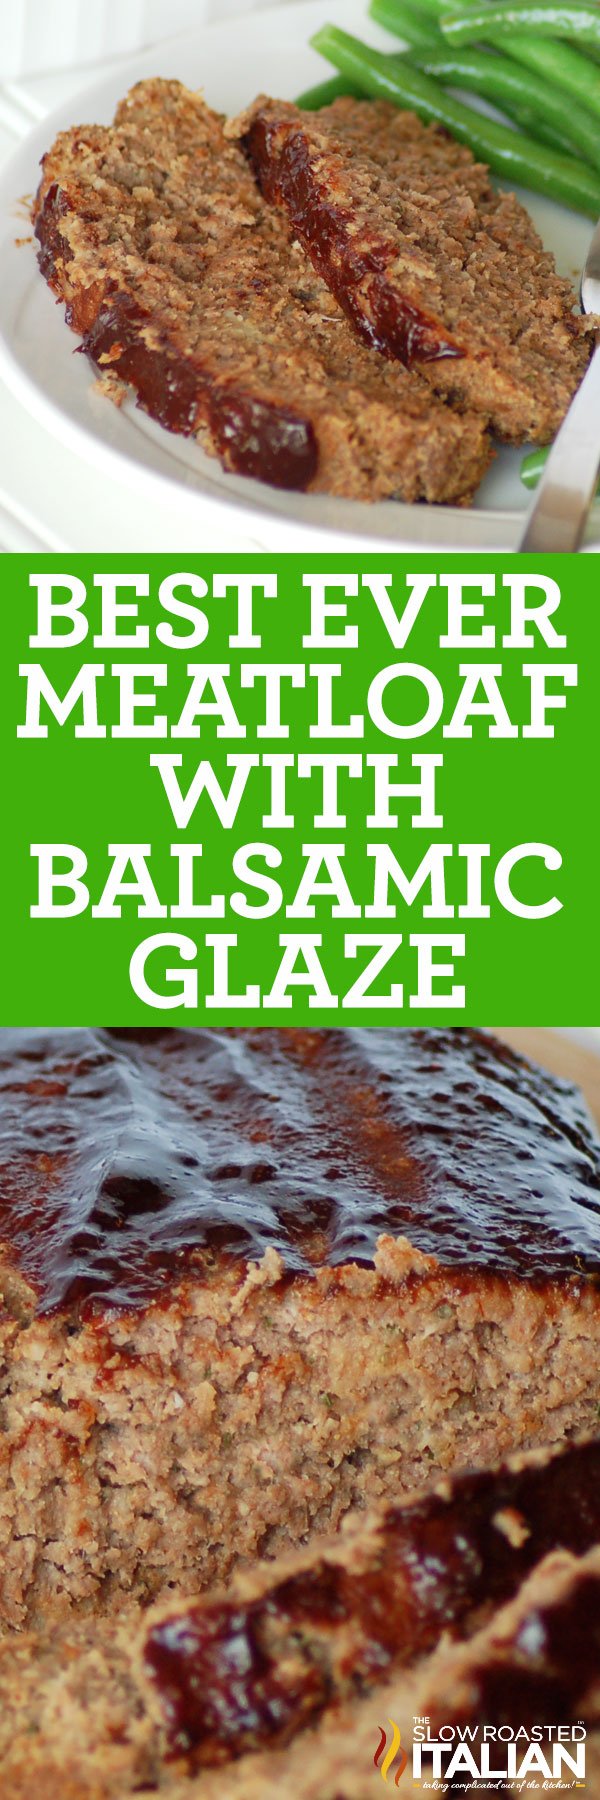 titled image (and shown): Best Ever Meatloaf with Balsamic Glaze